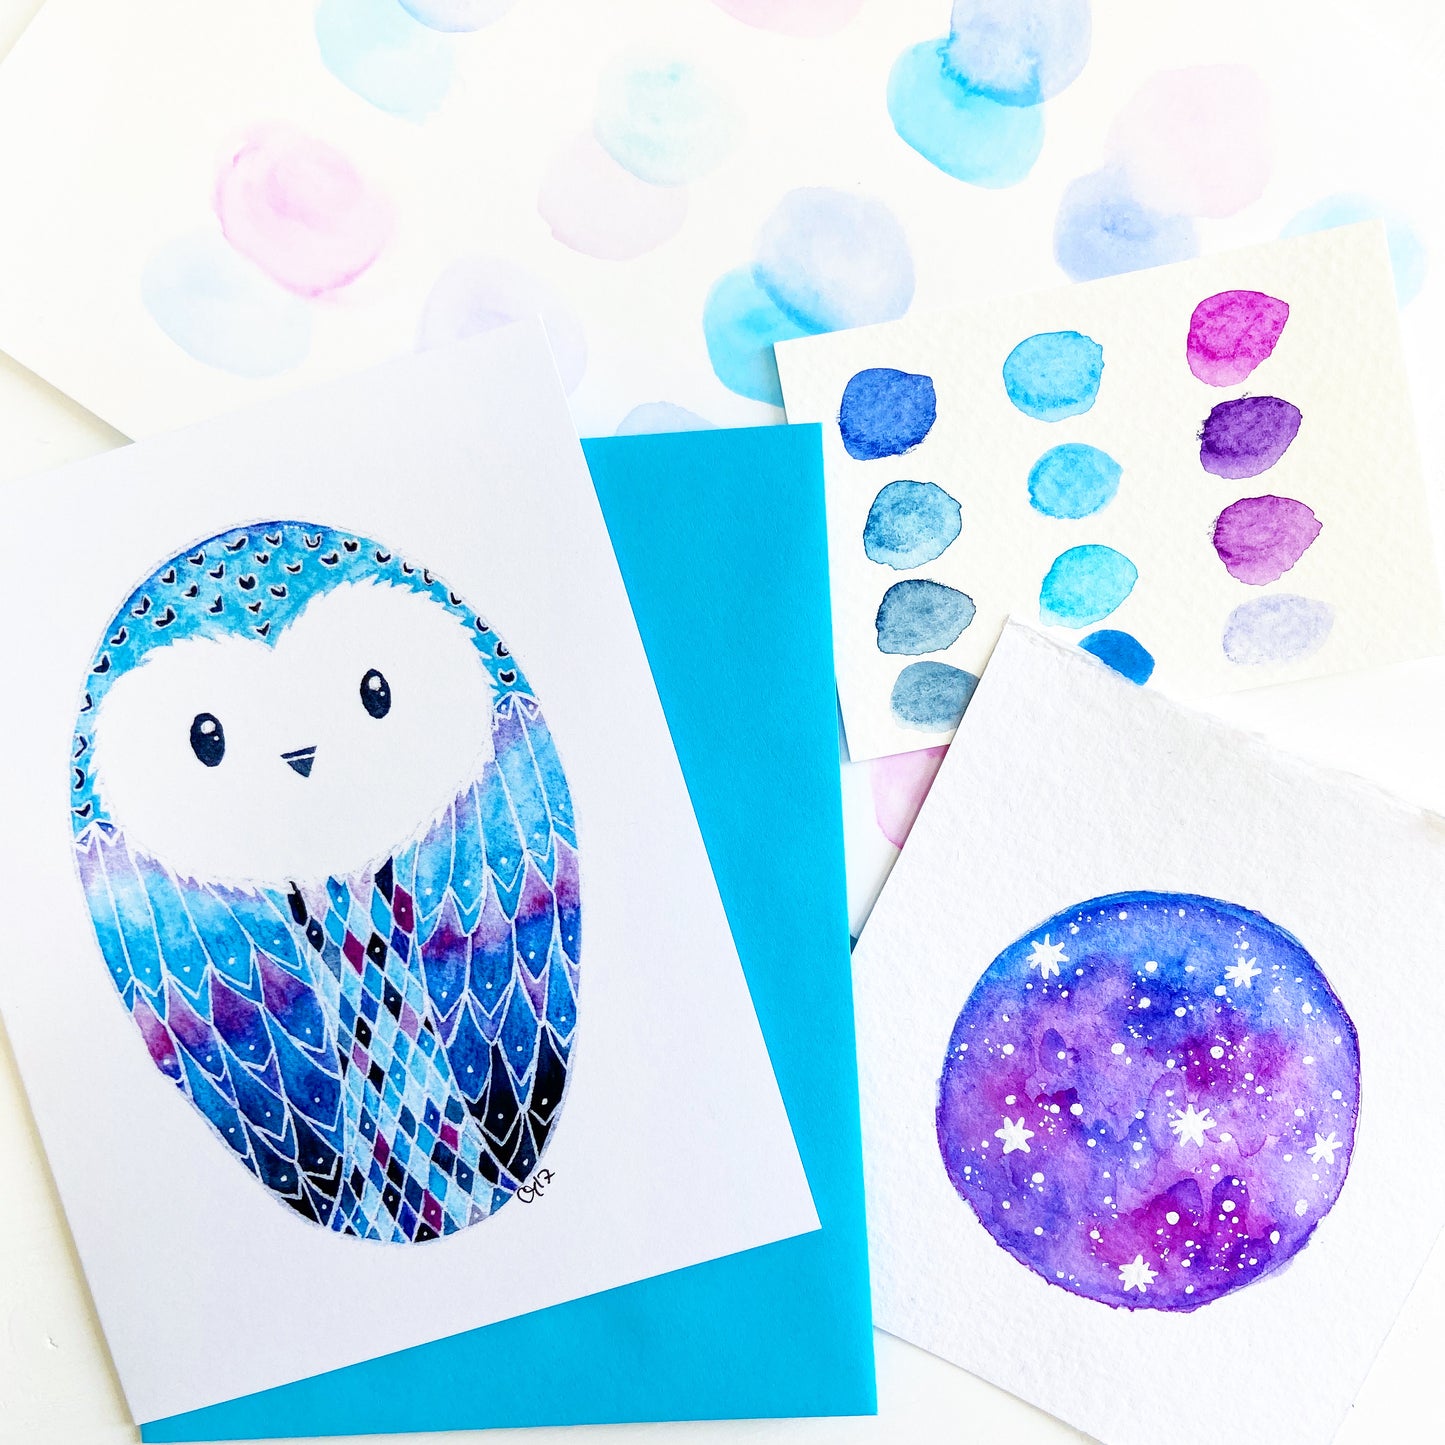 The Watchful Owl Greeting Card